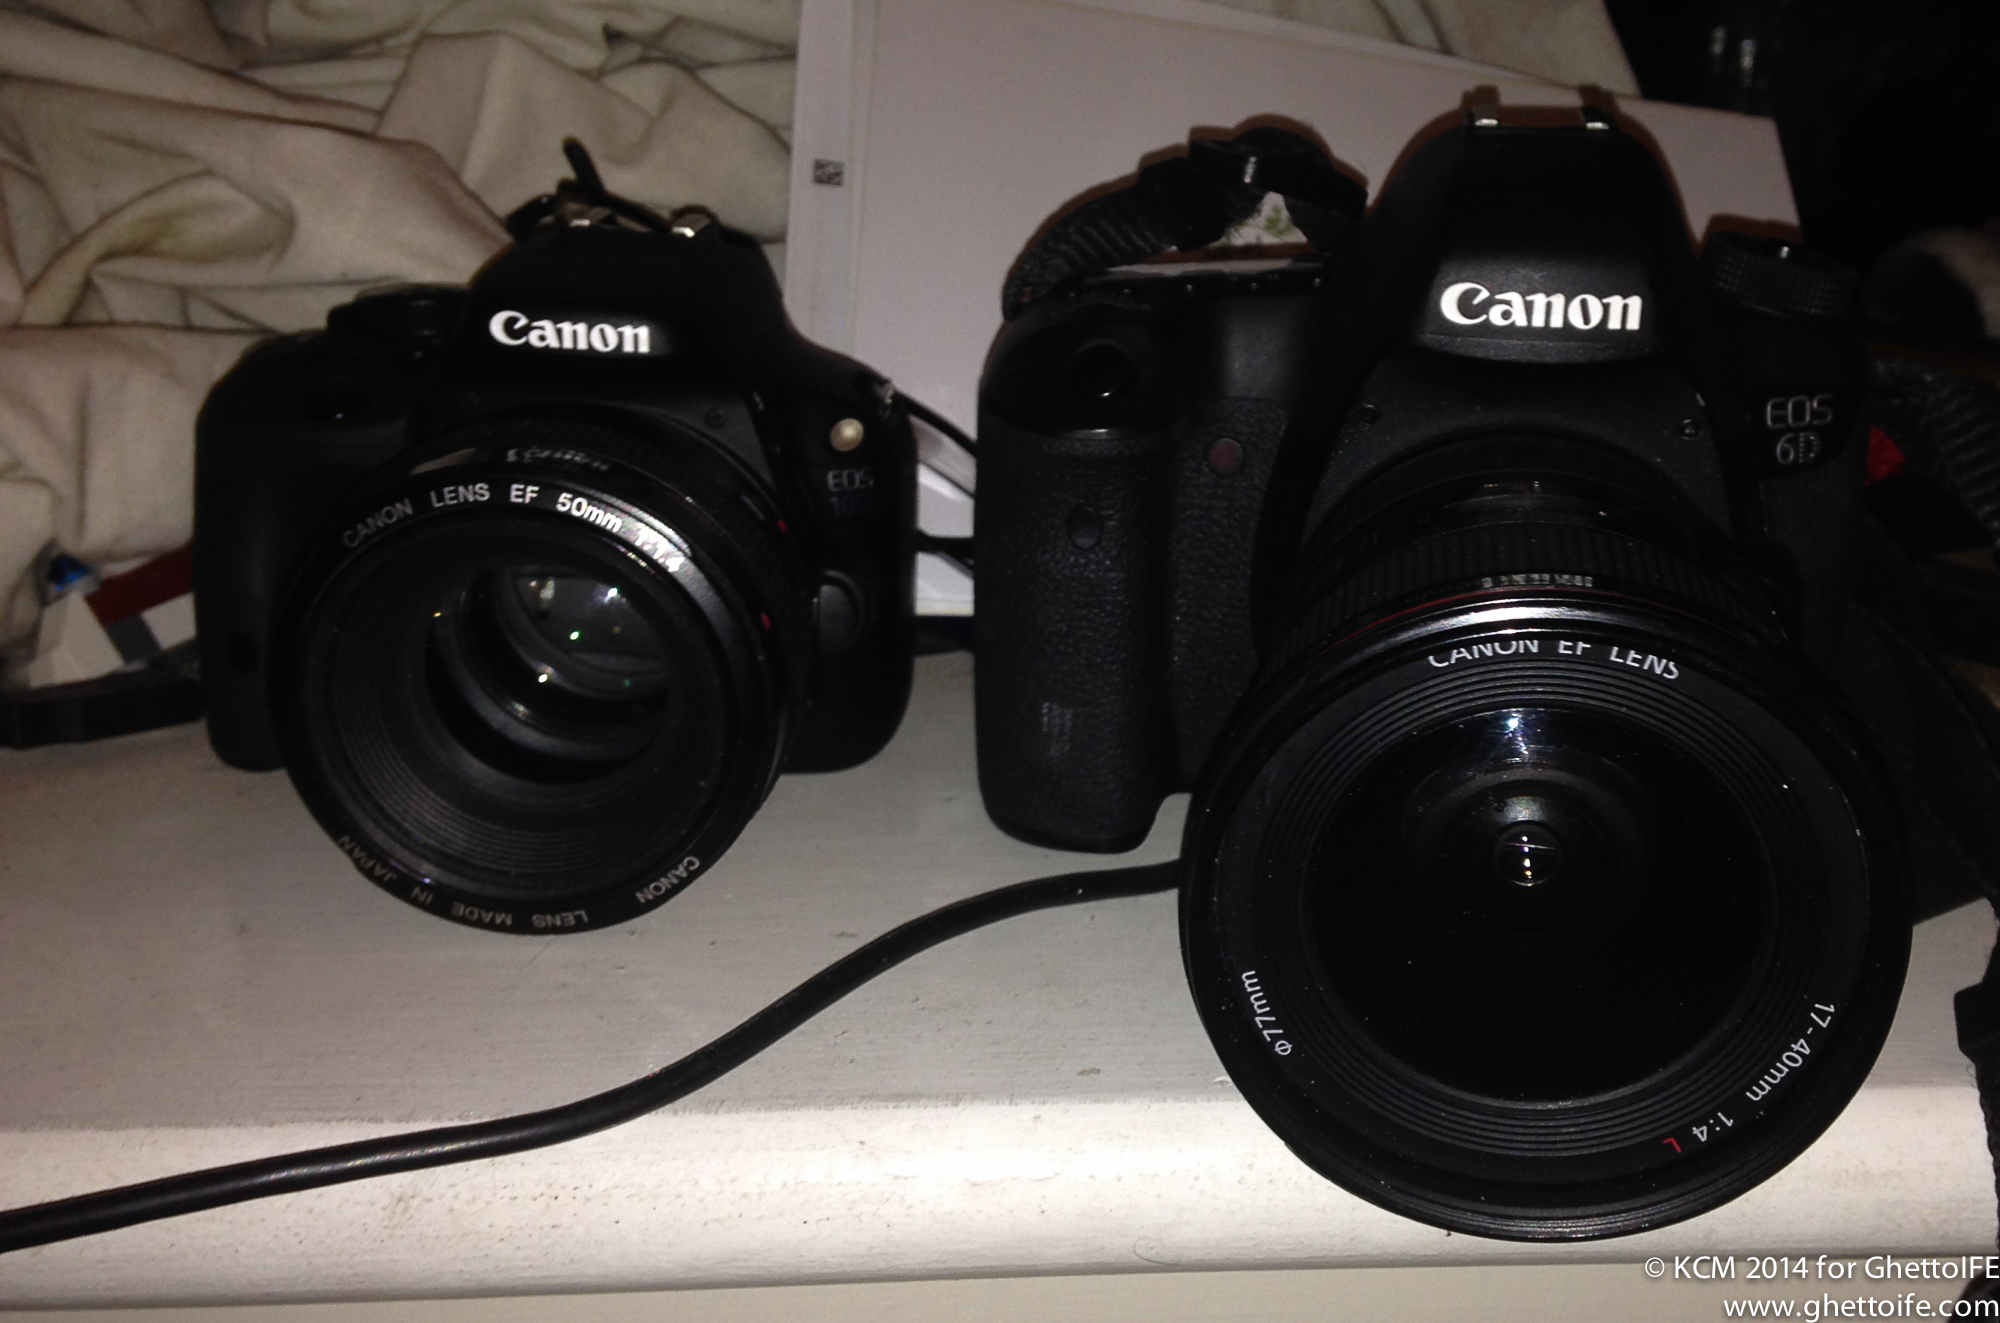 Canon 100D - The sized - Economy Class & Beyond